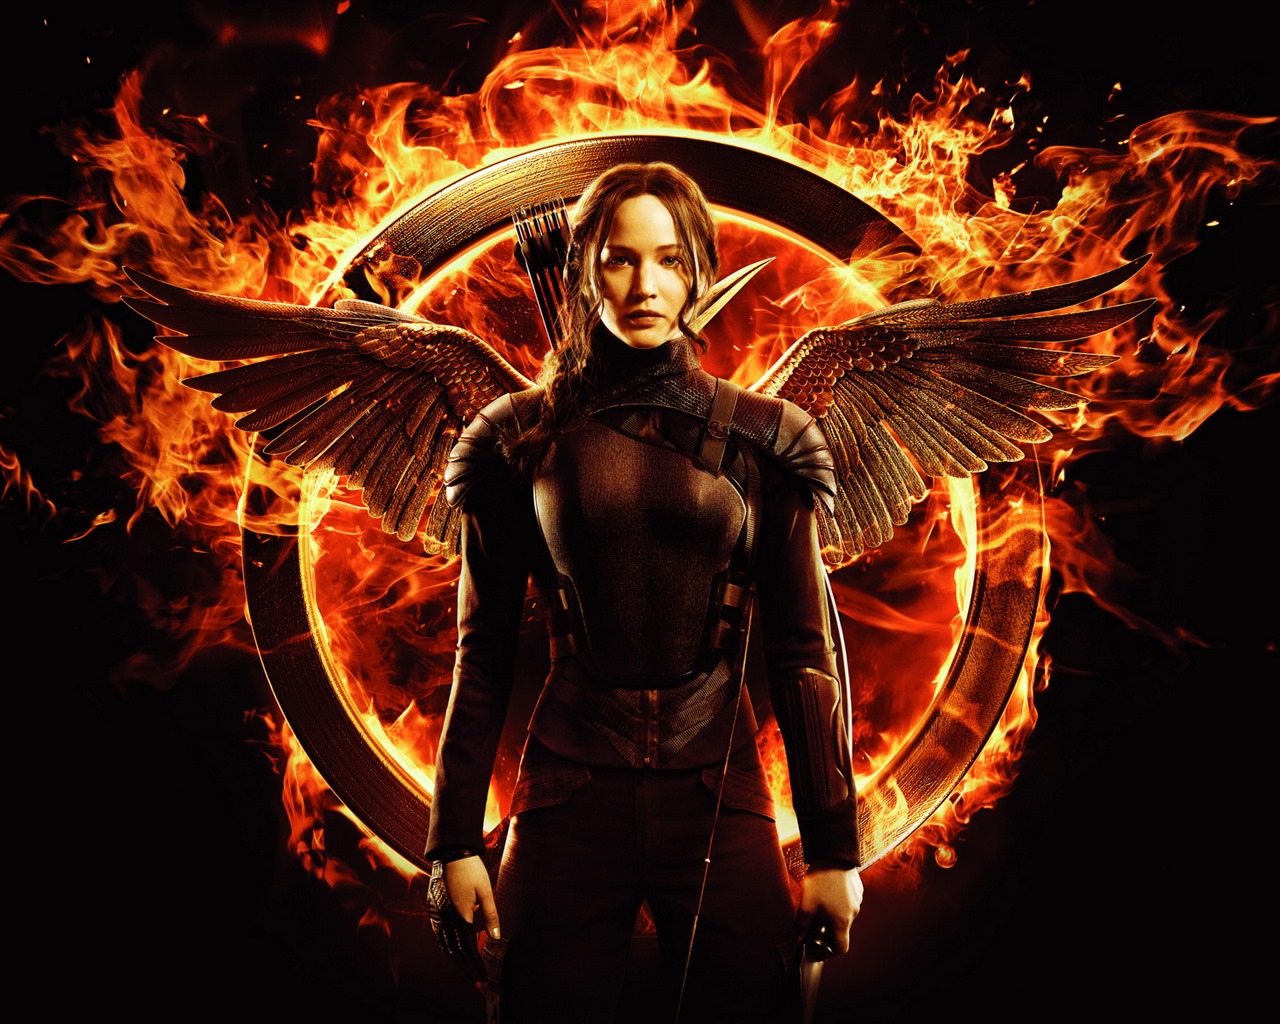 The Hunger Games: Mockingjay HD wallpapers #10 - 1280x1024